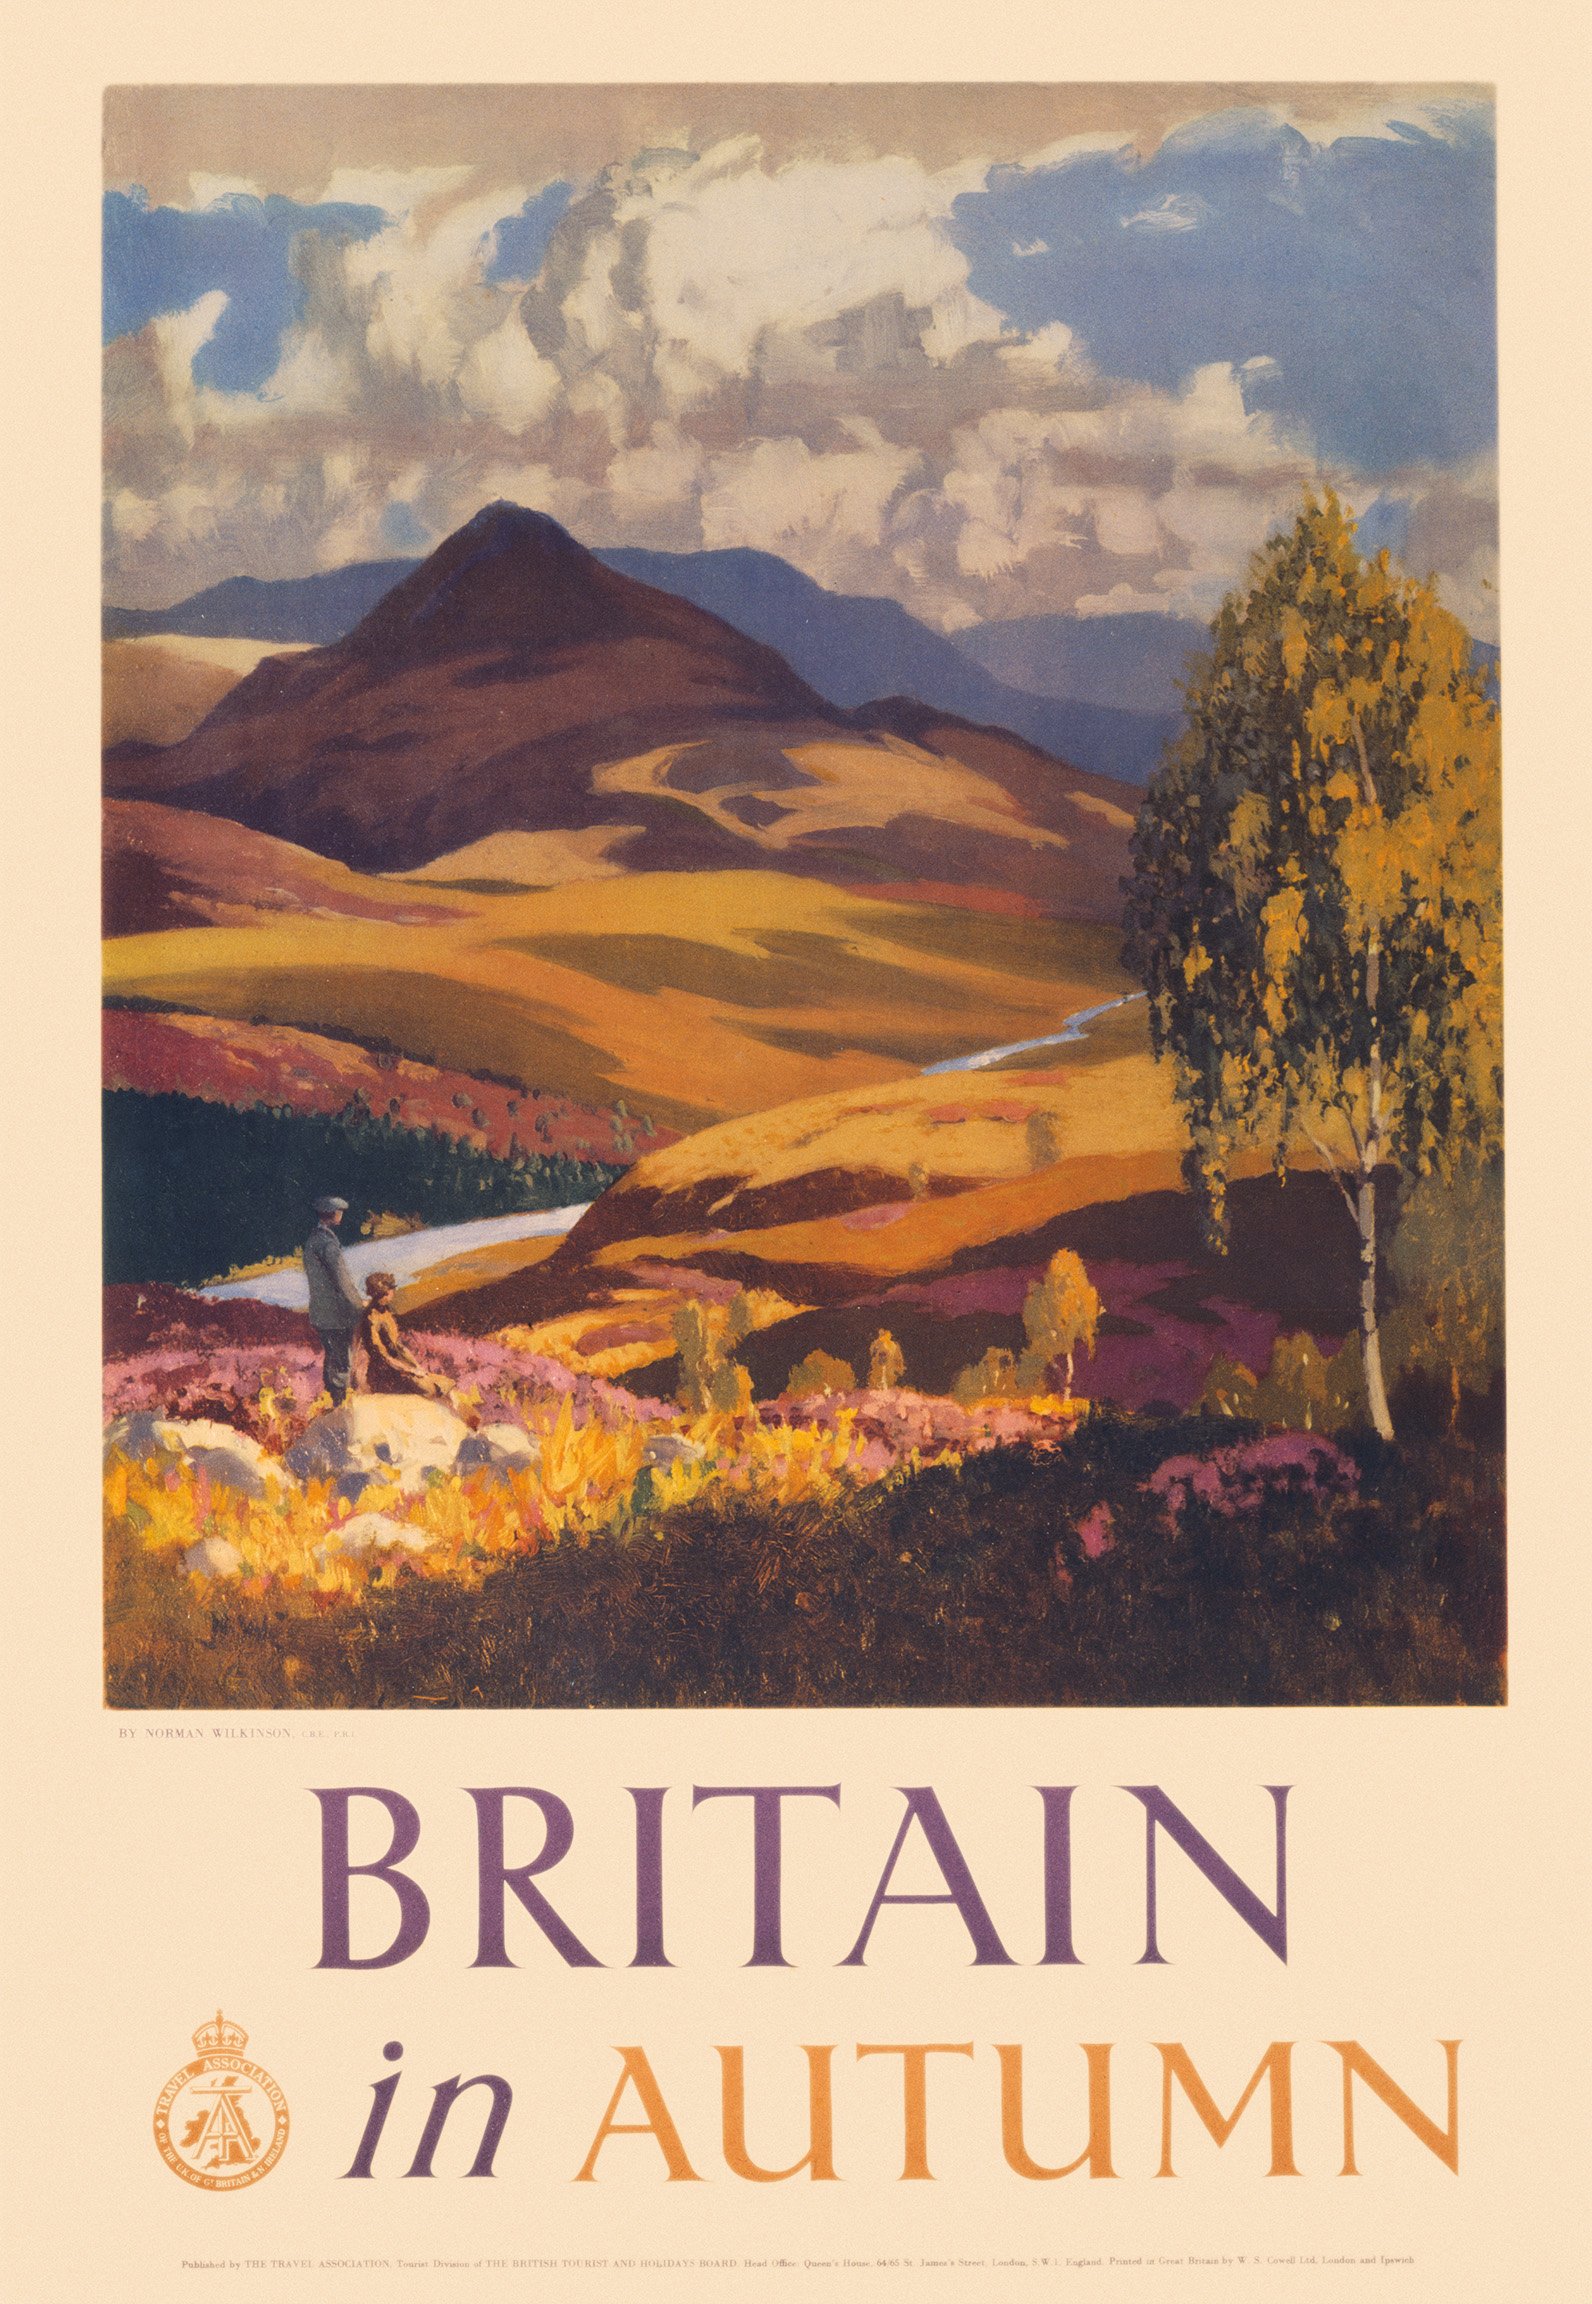 British Tourist and Holidays Board poster. Artwork by Norman Wilkinson.